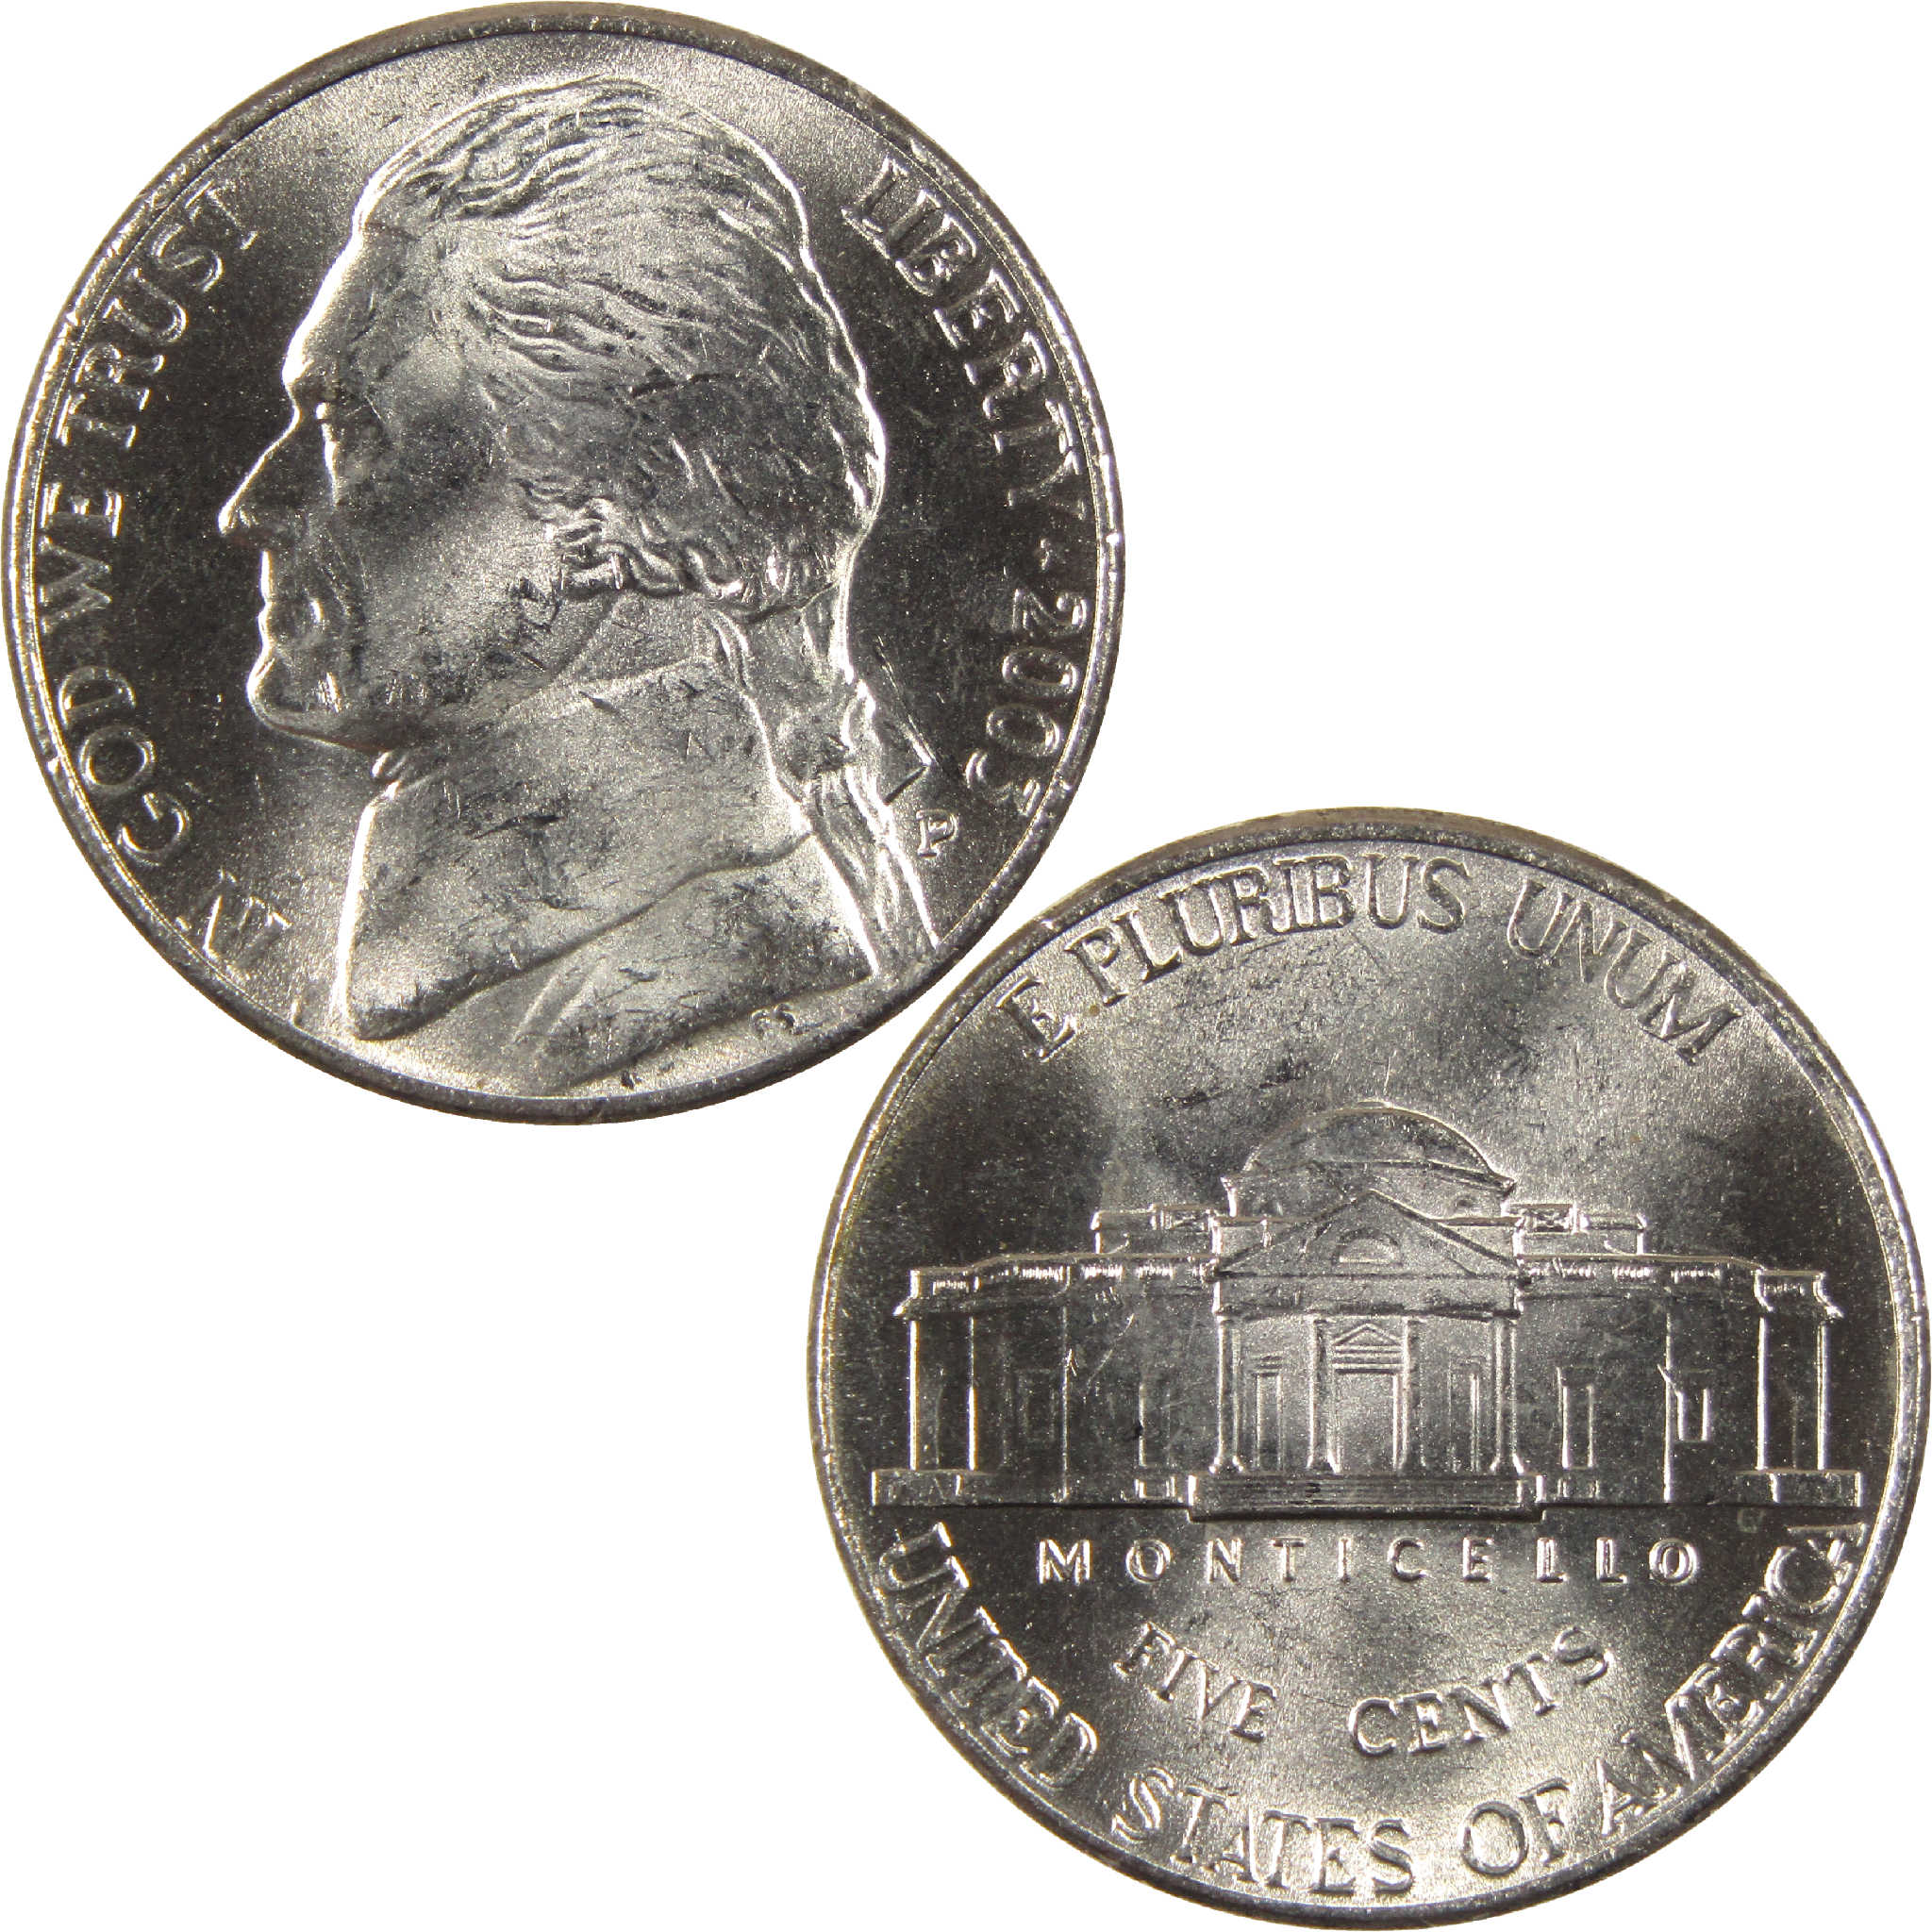 2003 P Jefferson Nickel Uncirculated 5c Coin